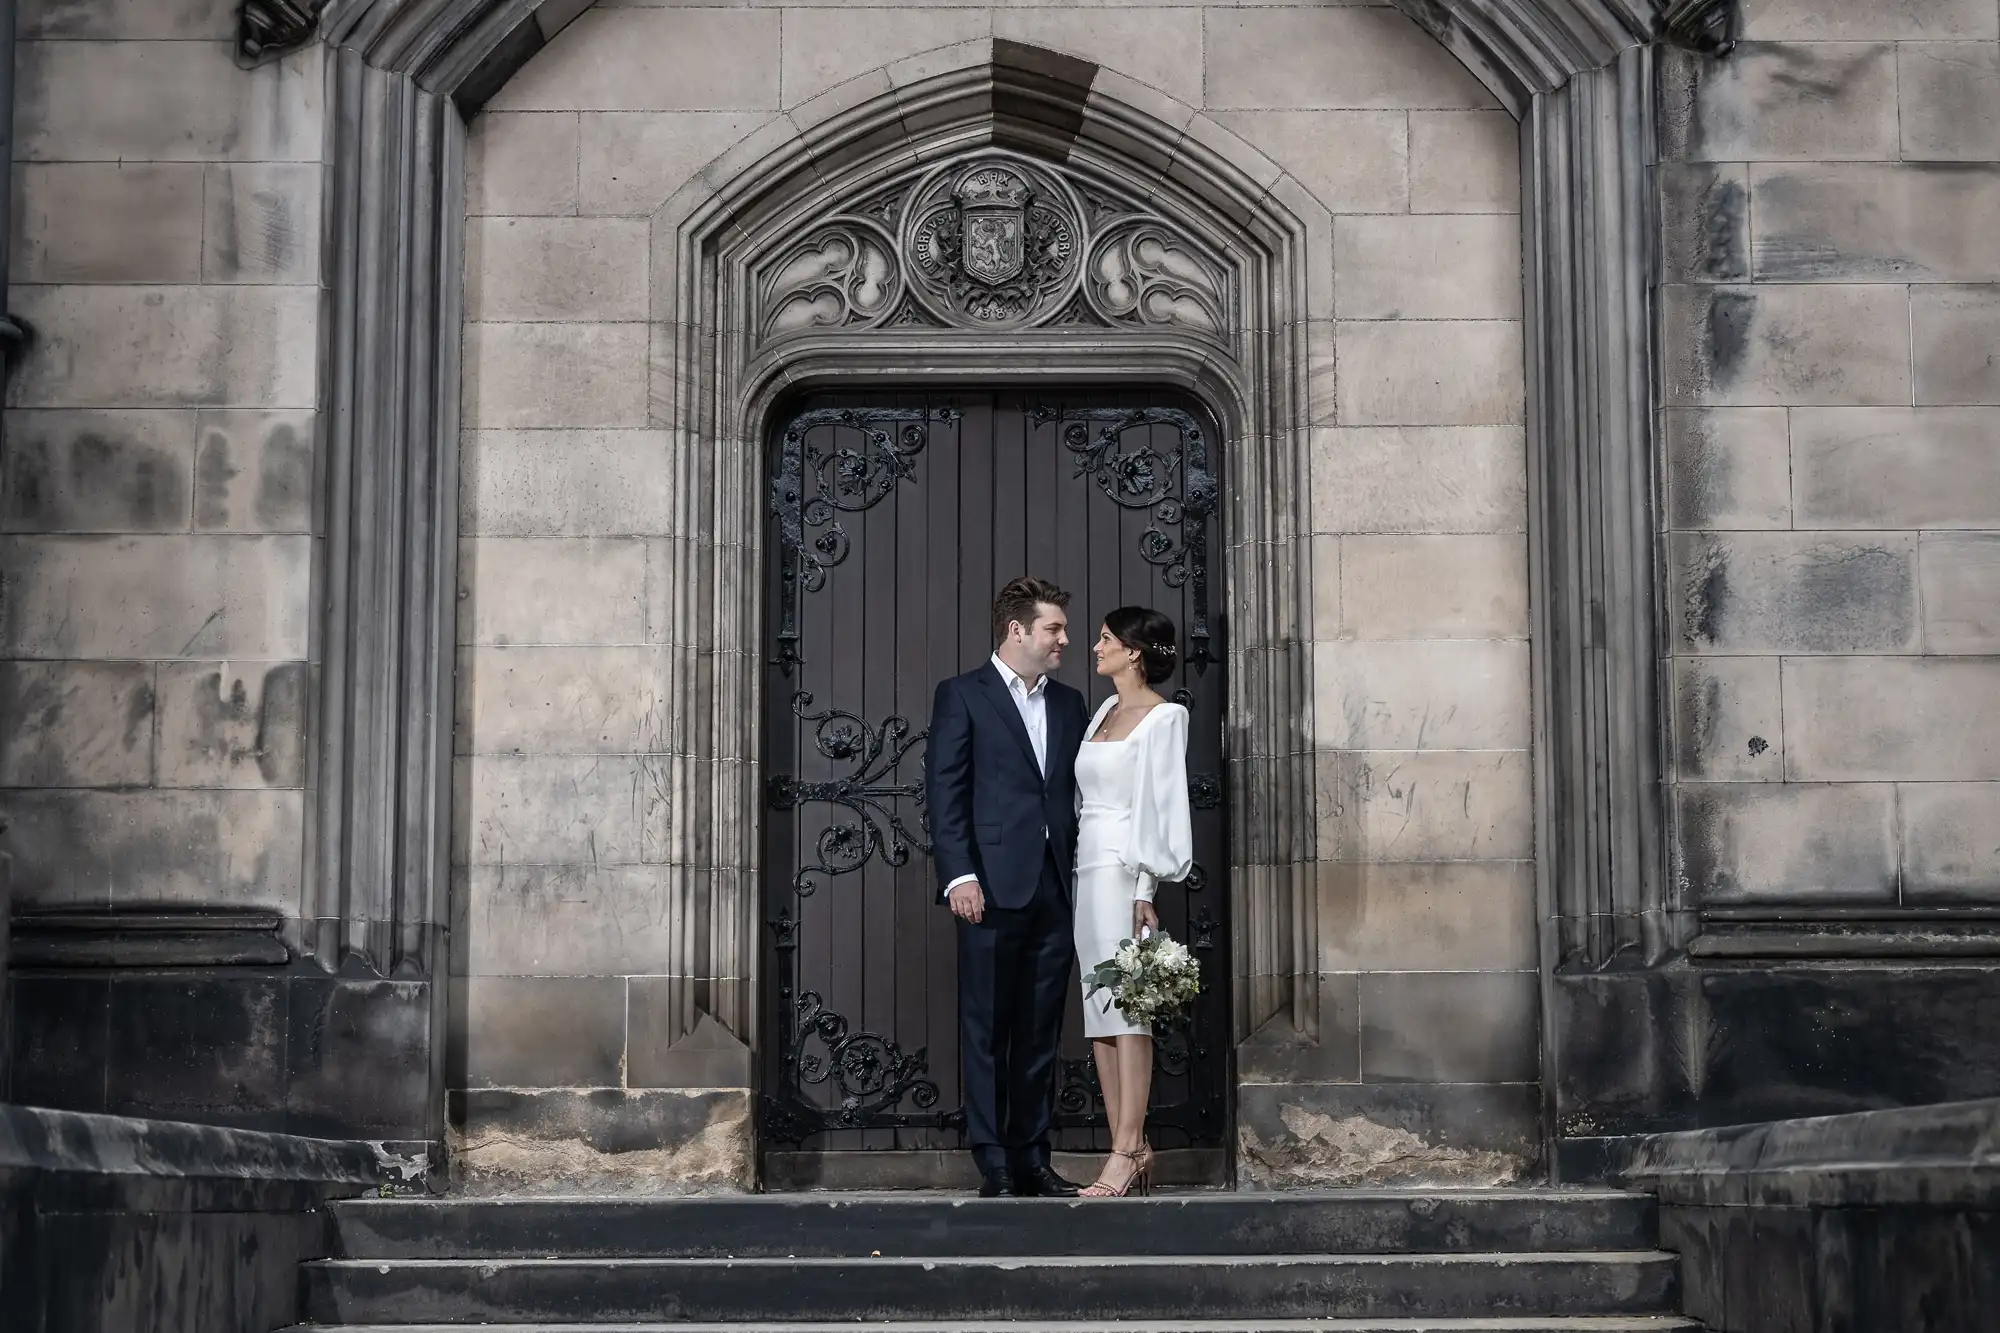 A couple stands closely on the steps of an ornate, historic doorway, exchanging smiles, with the woman holding a bouquet.